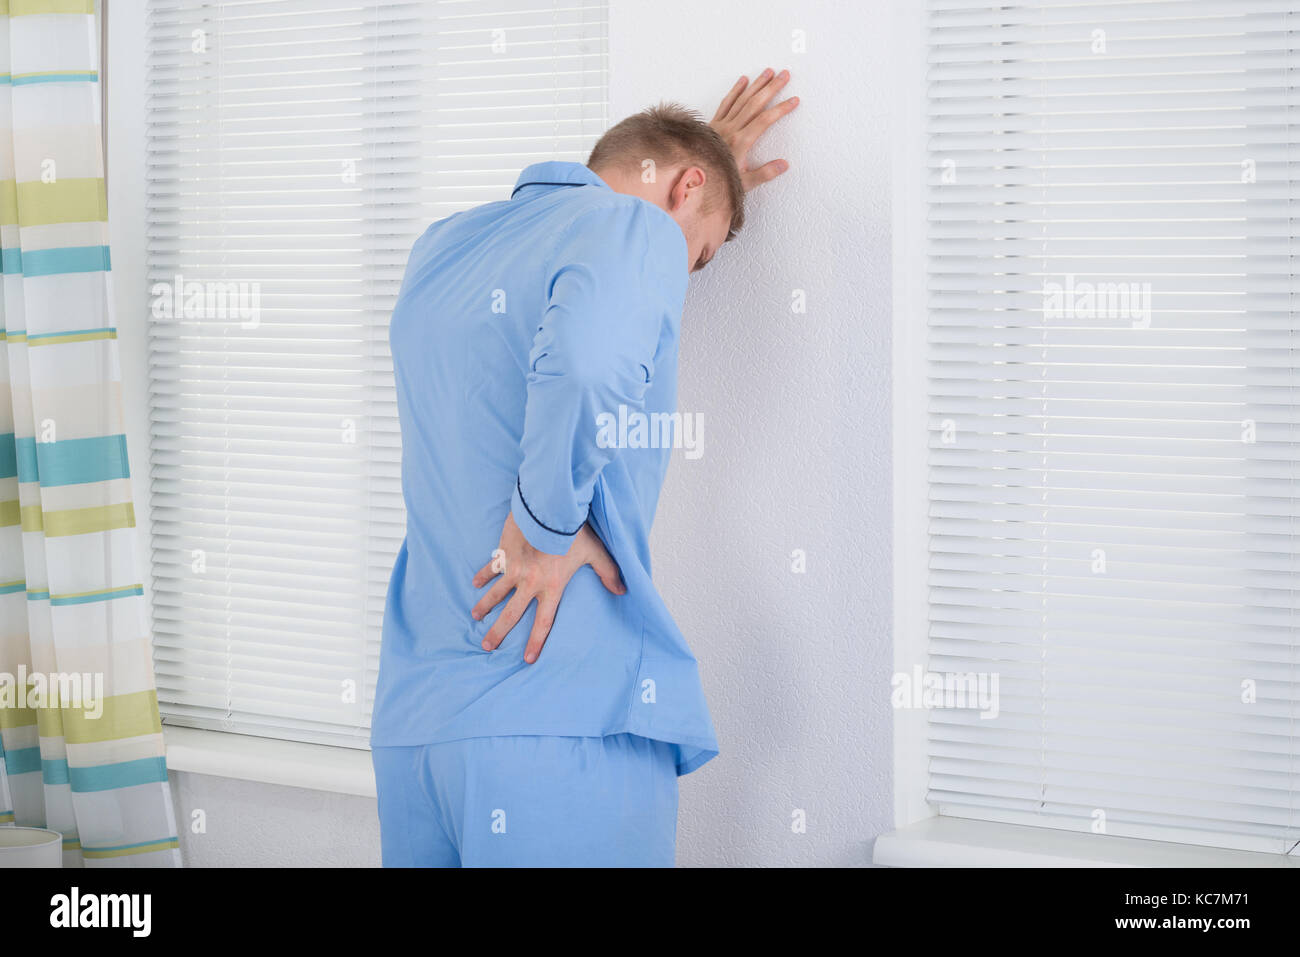 Man Suffering From Back Ache Standing Against Wall Stock Photo